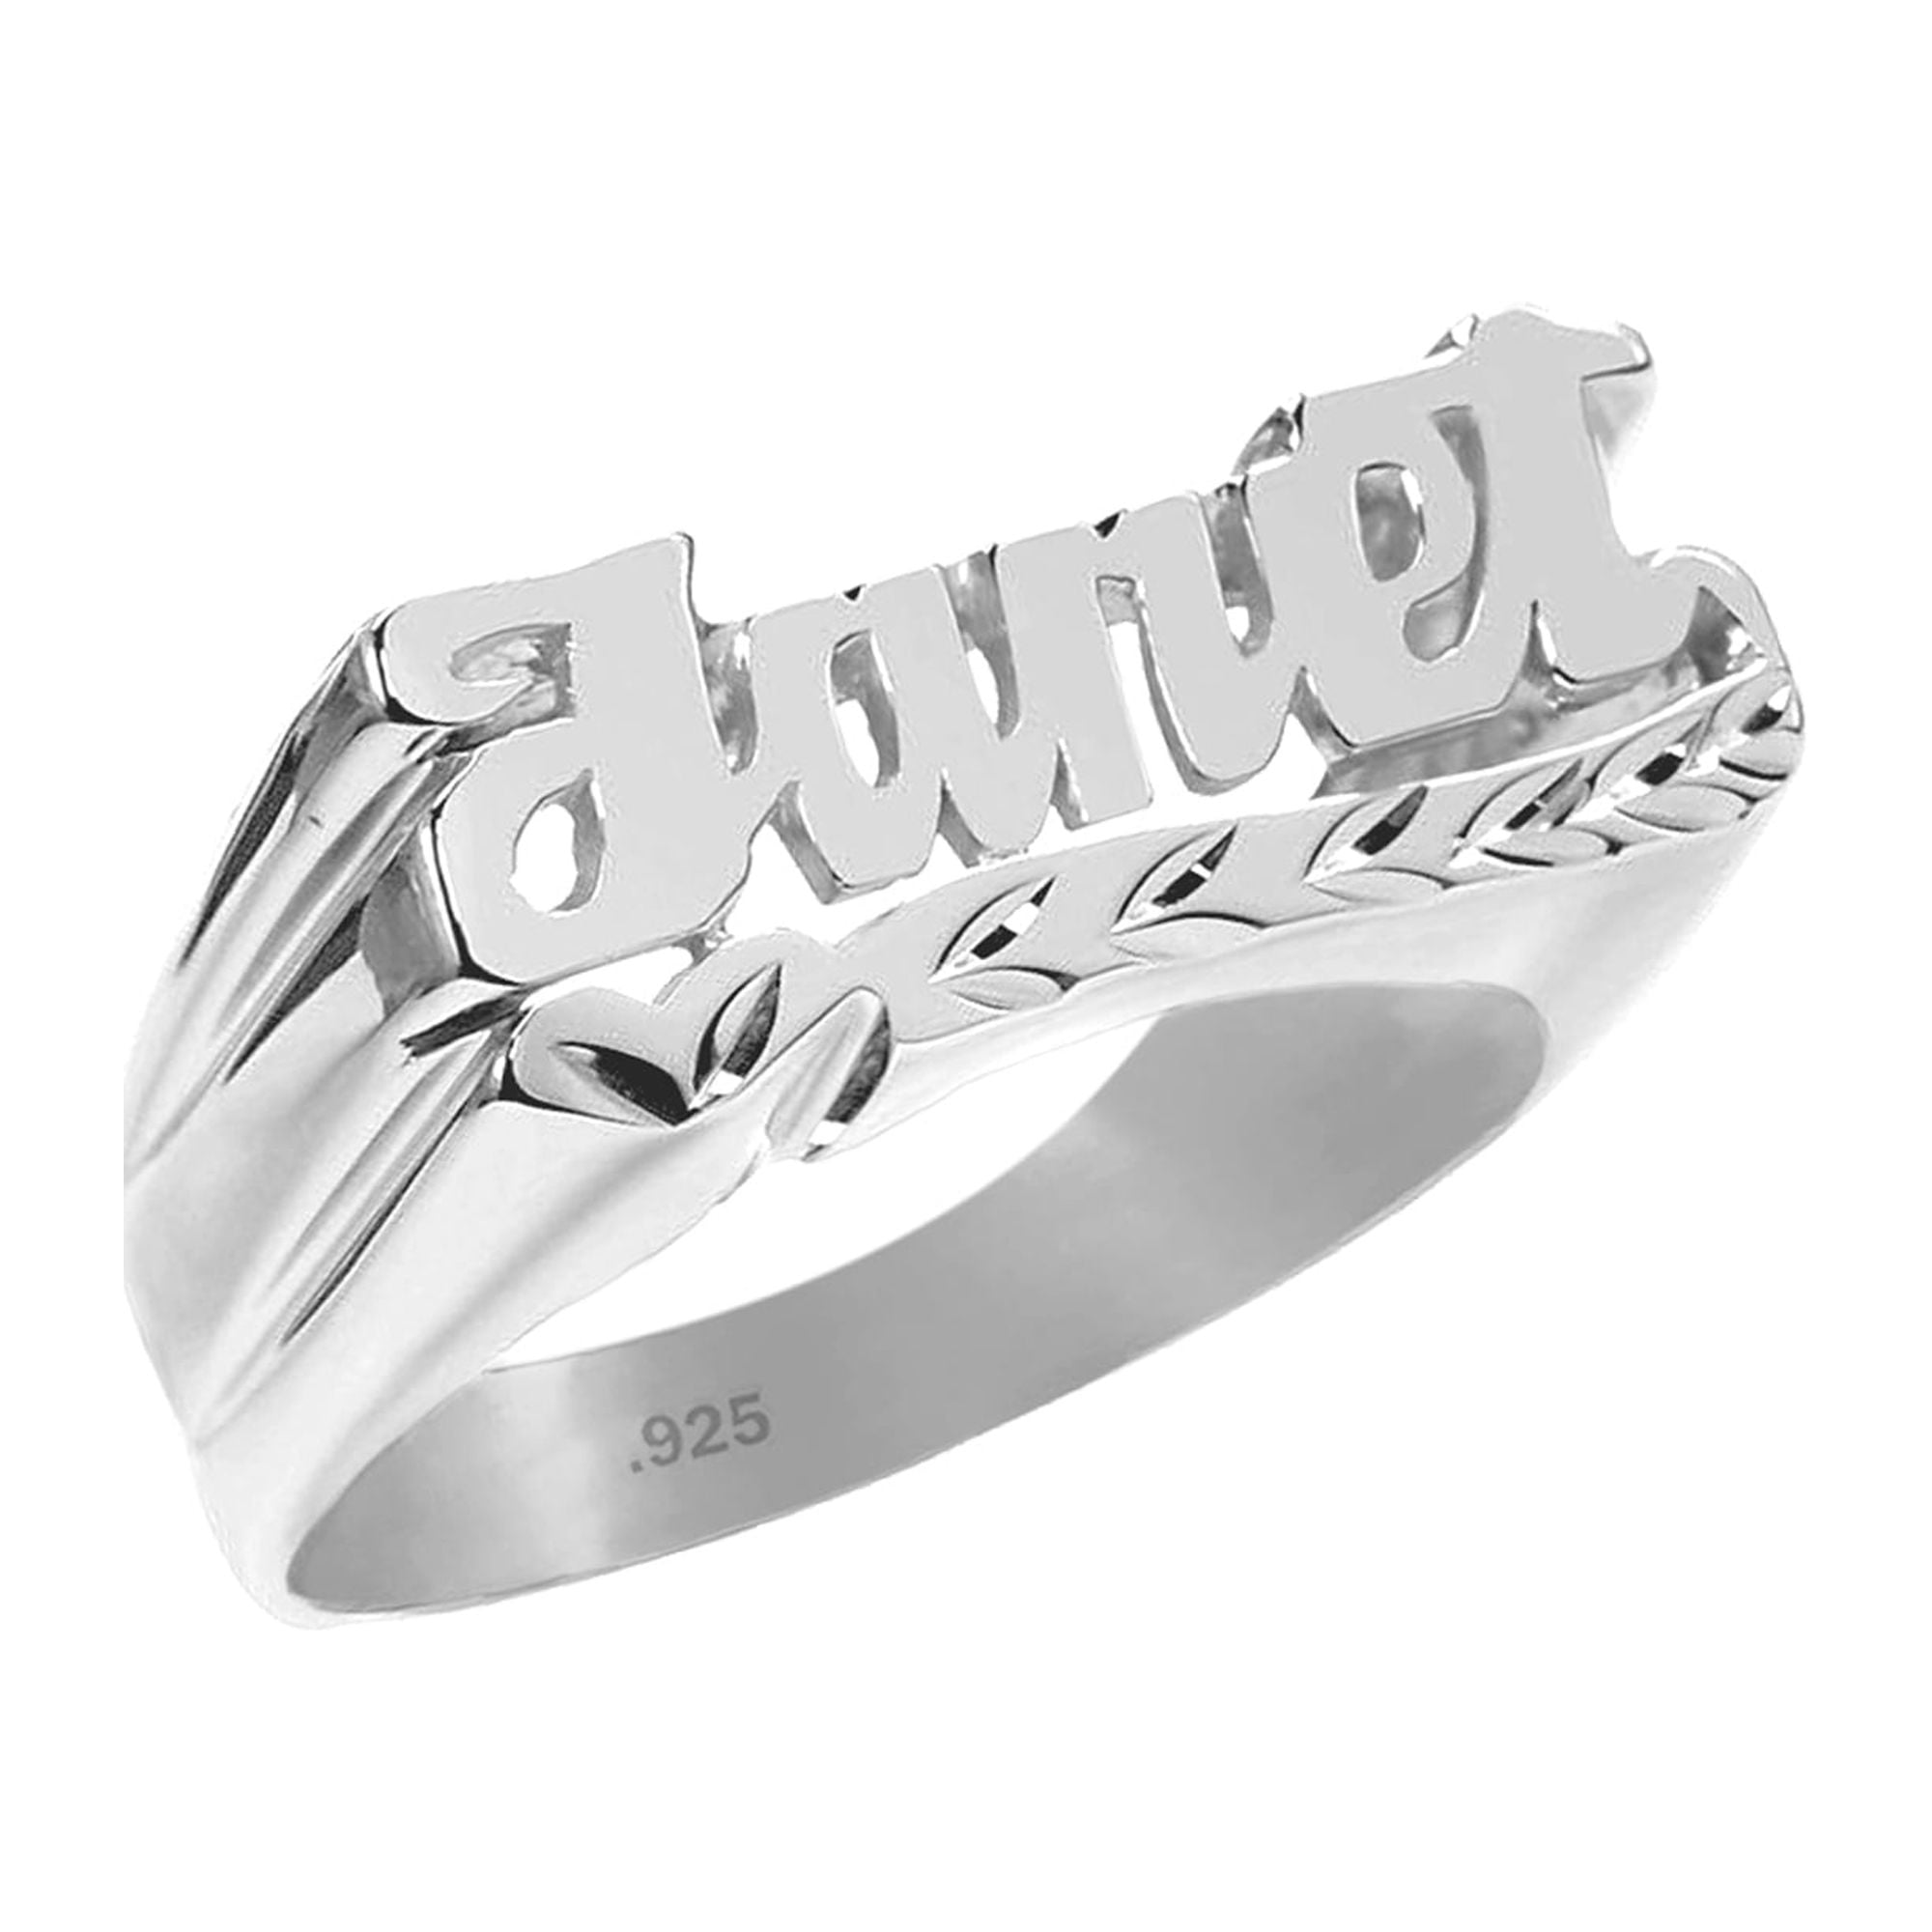 Amazon.com: Custom Name Ring in 925 Sterling Silver Personalized Children Name  Ring in Sterling Silver Custom Jewelry Gift for Her Grandma Gift Mom Gift :  Handmade Products